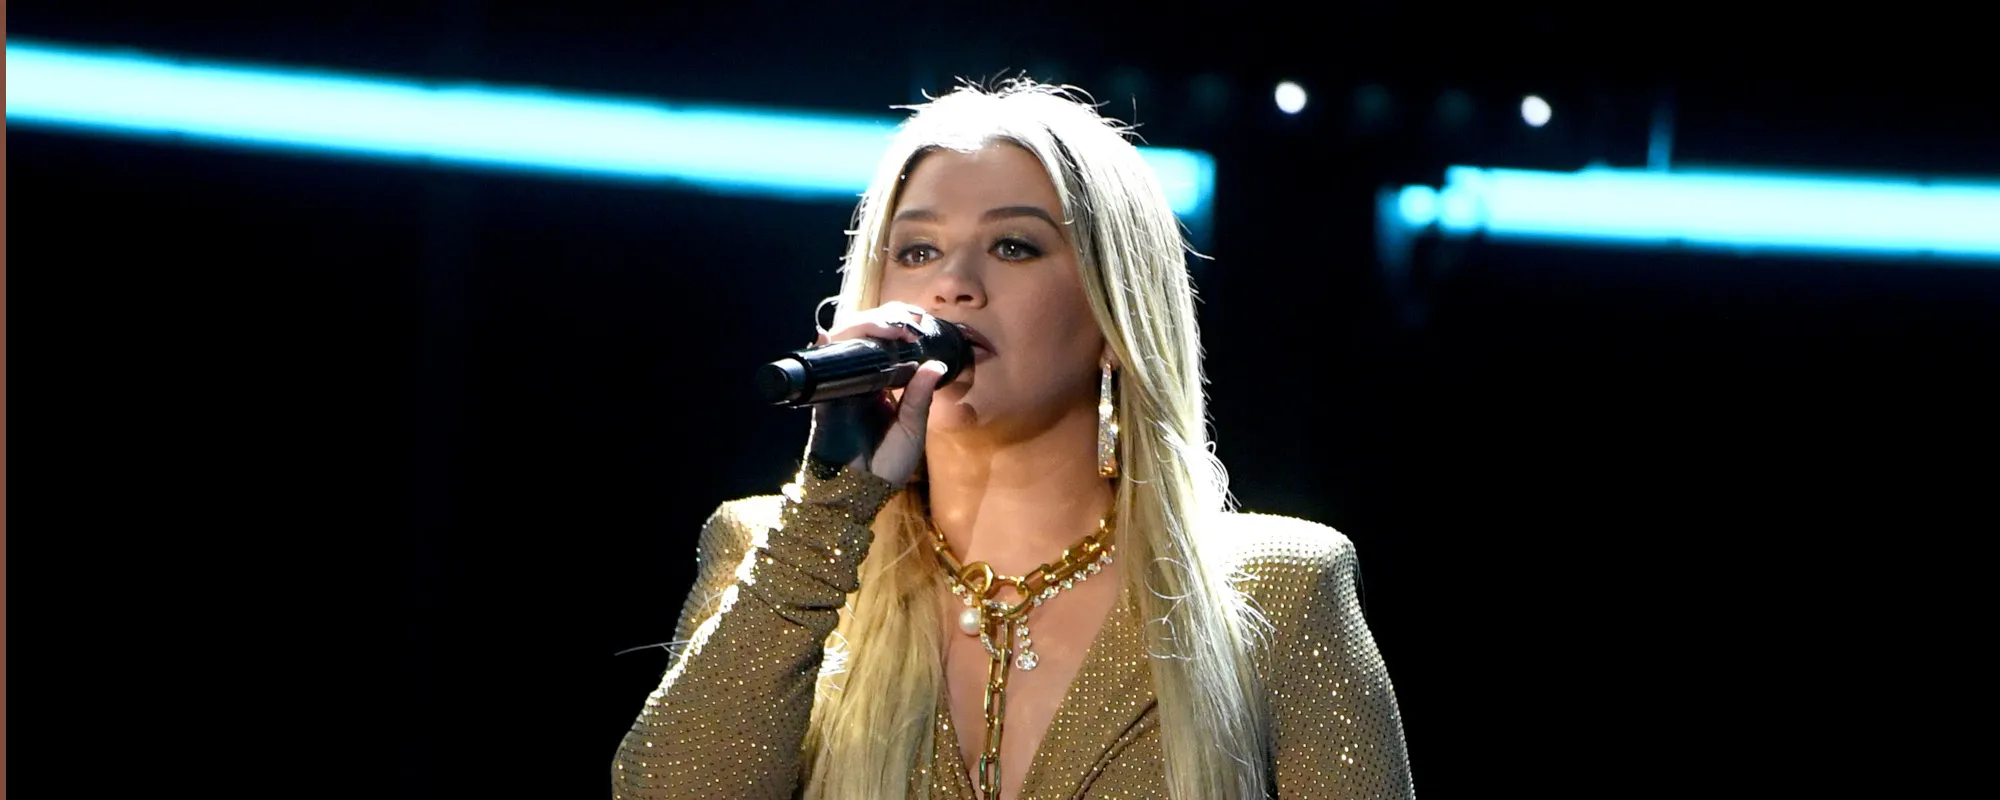 Kelly Clarkson Covers Red Hot Chili Peppers, Justin Bieber in Latest ‘Kellyoke’